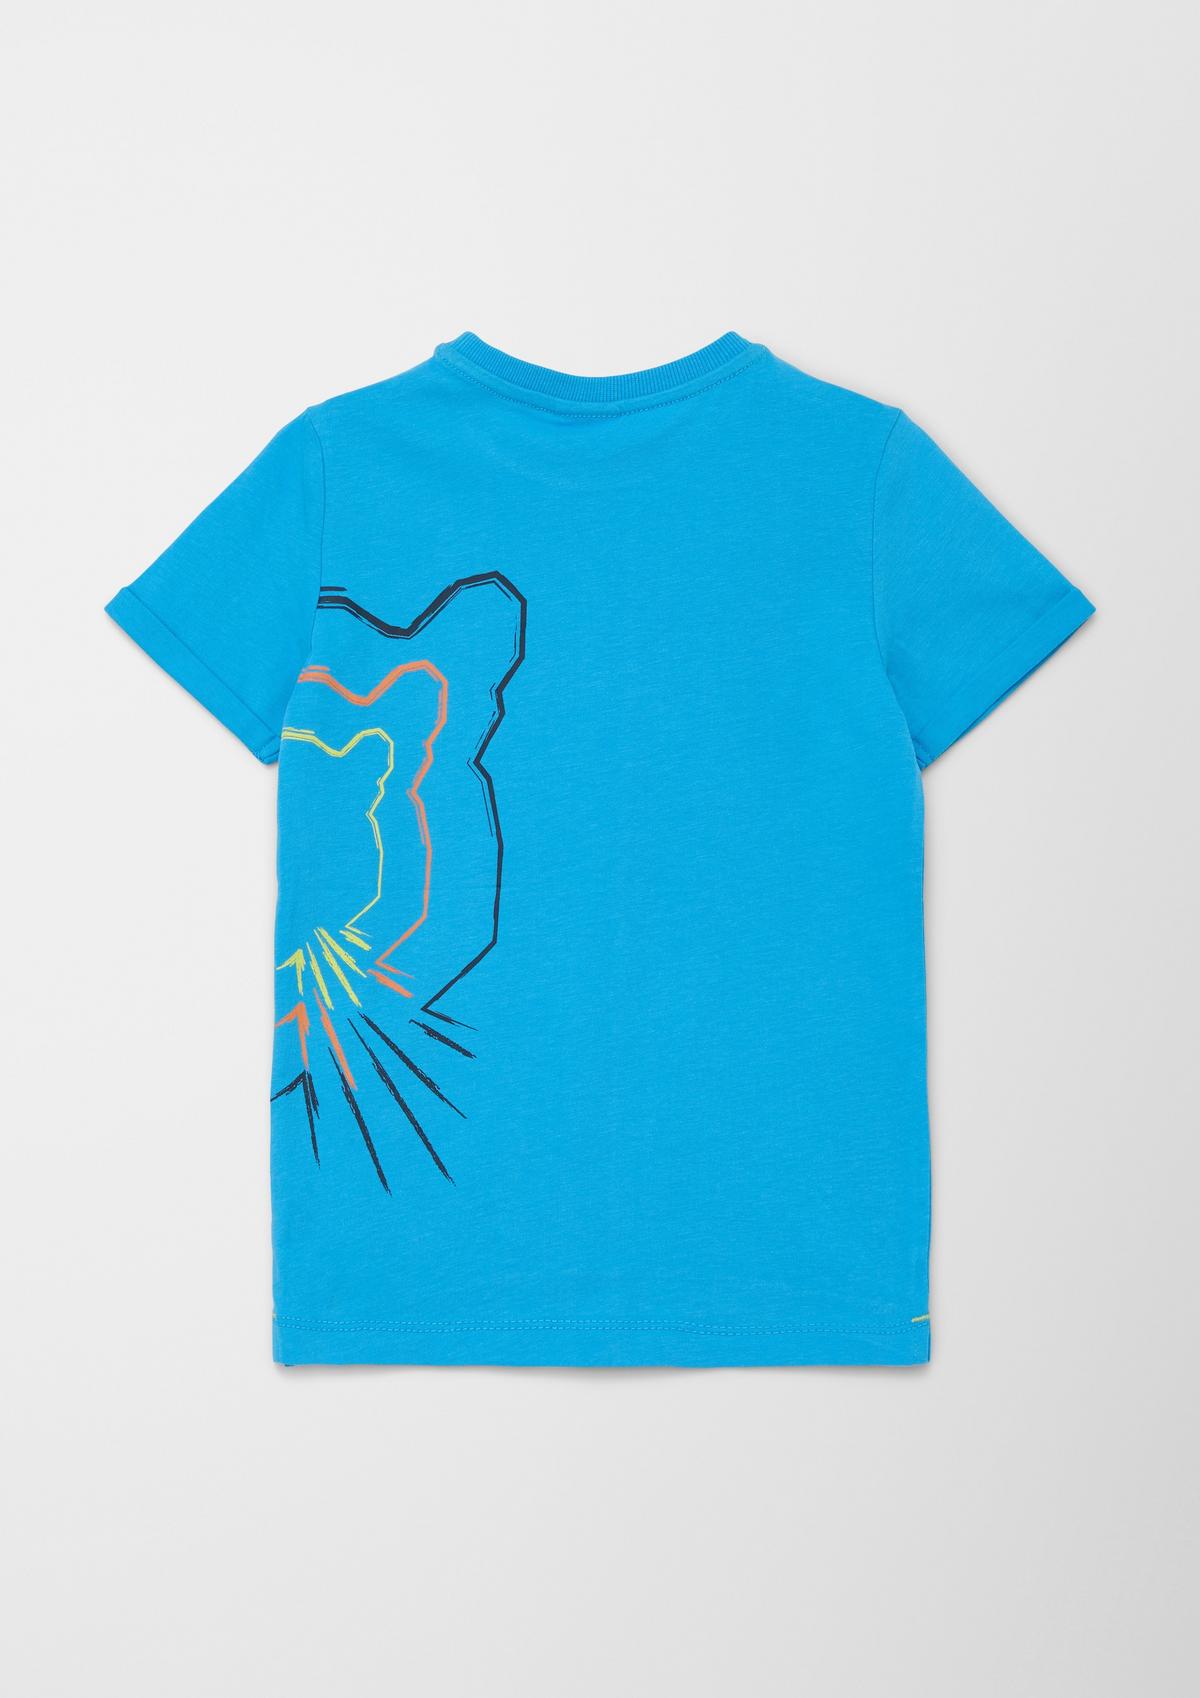 s.Oliver T-shirt with a rubberised print